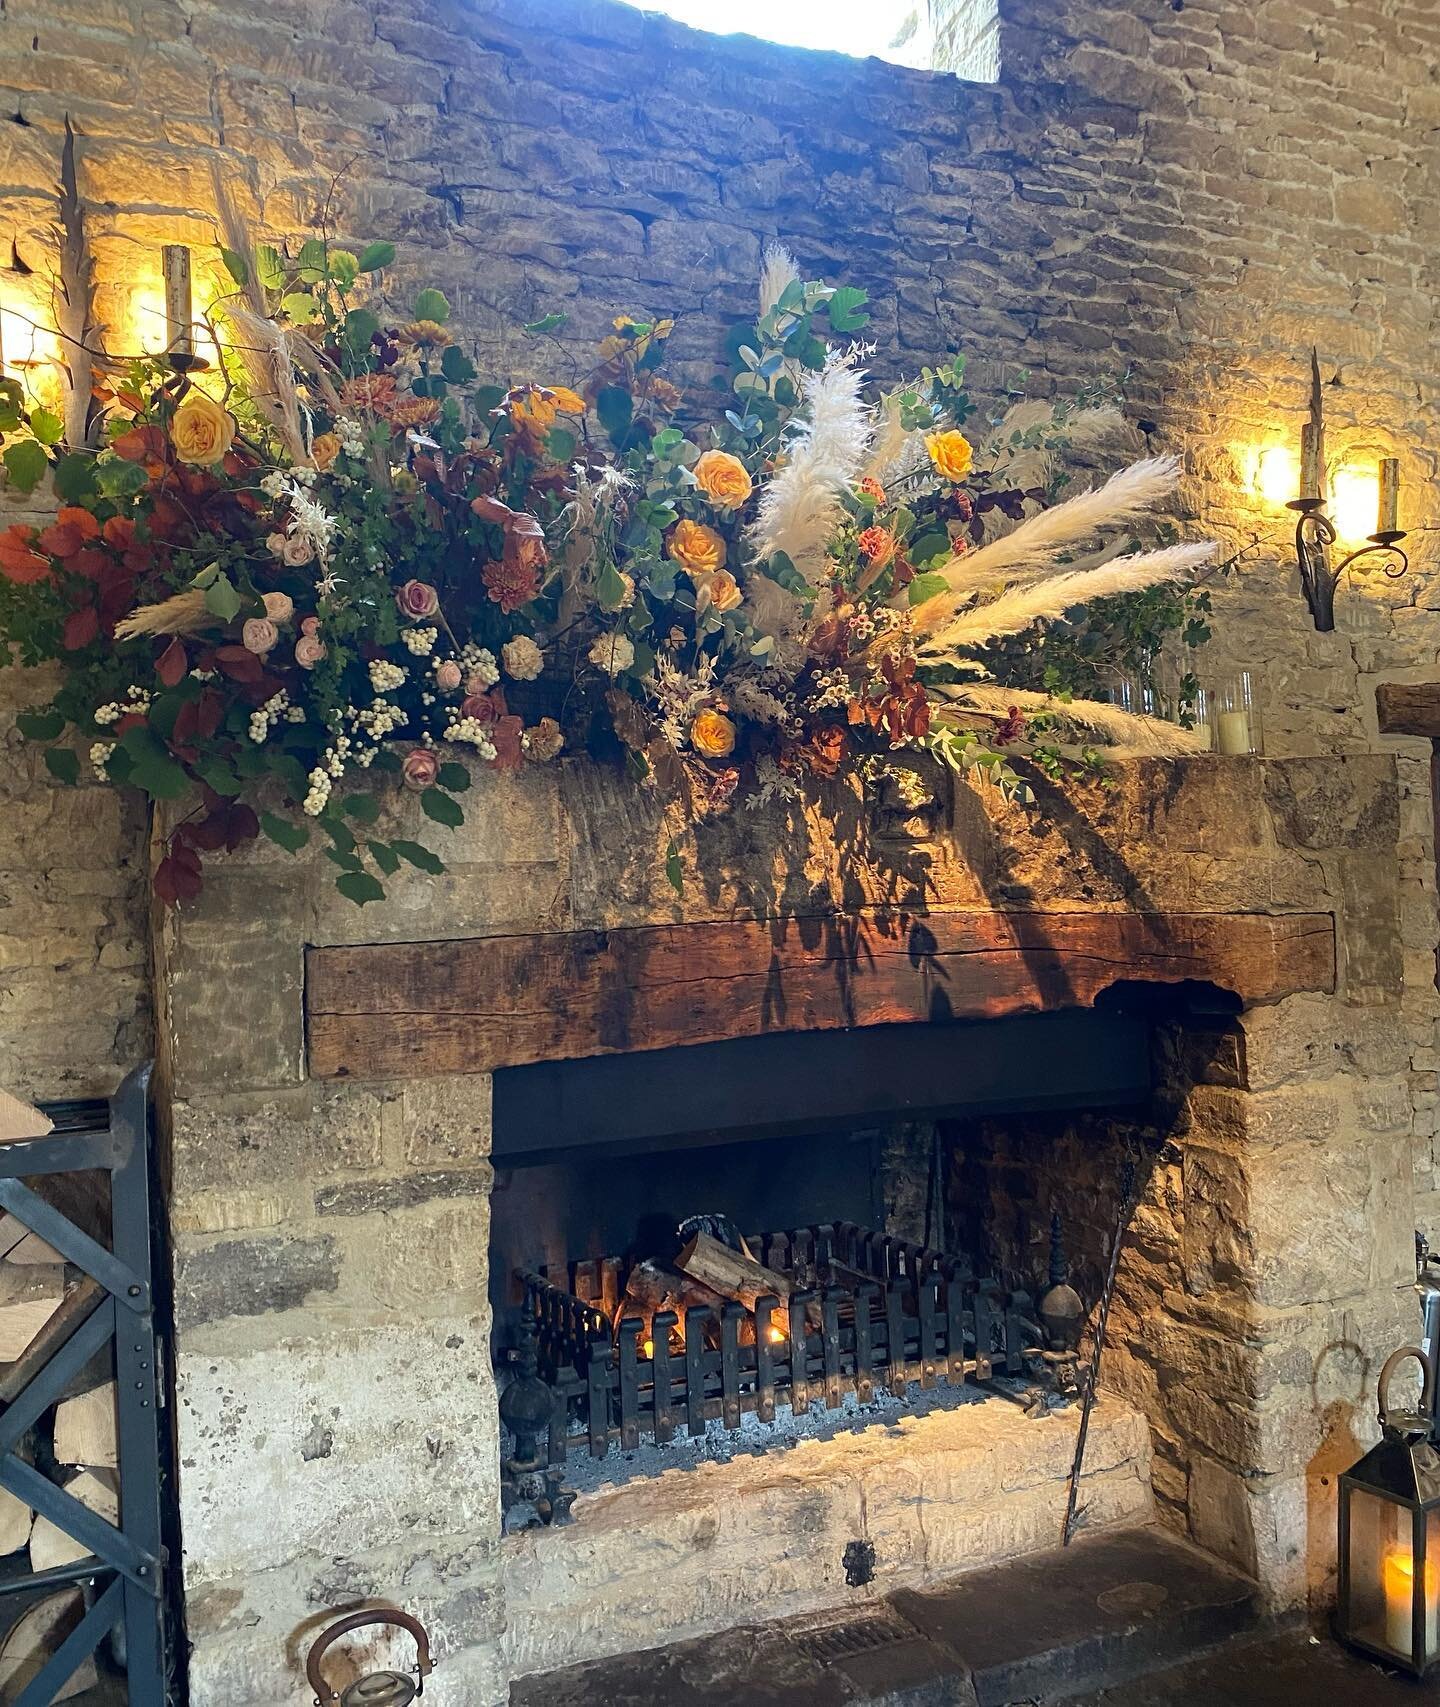 Autumny weddings are back 🤎🍂 ps this mantle is HUUUGE I had to use a ladder to flower it @honeysuckleflowerco @crippsbarn  #honeysuckleflowerco #autumn #weddingflowers #crippsbarn